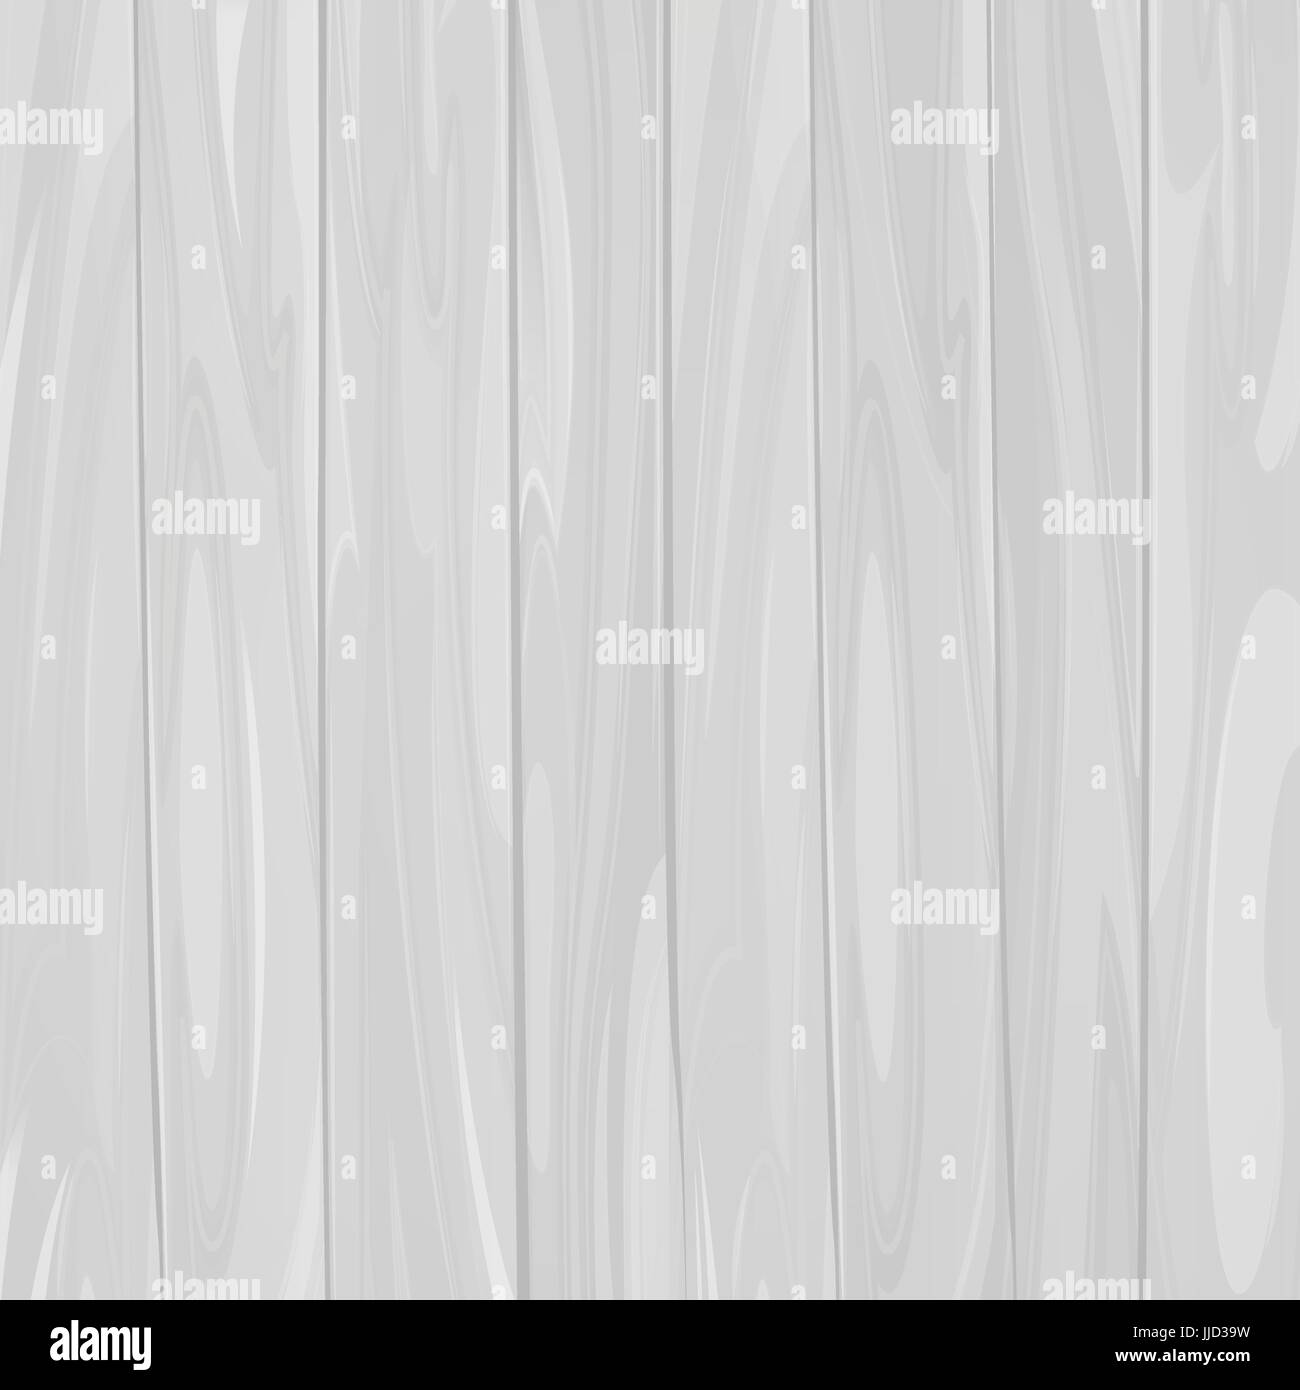 Vector white retro wood textured background with vertical planks, grunge vintage wooden texture timbers Stock Vector